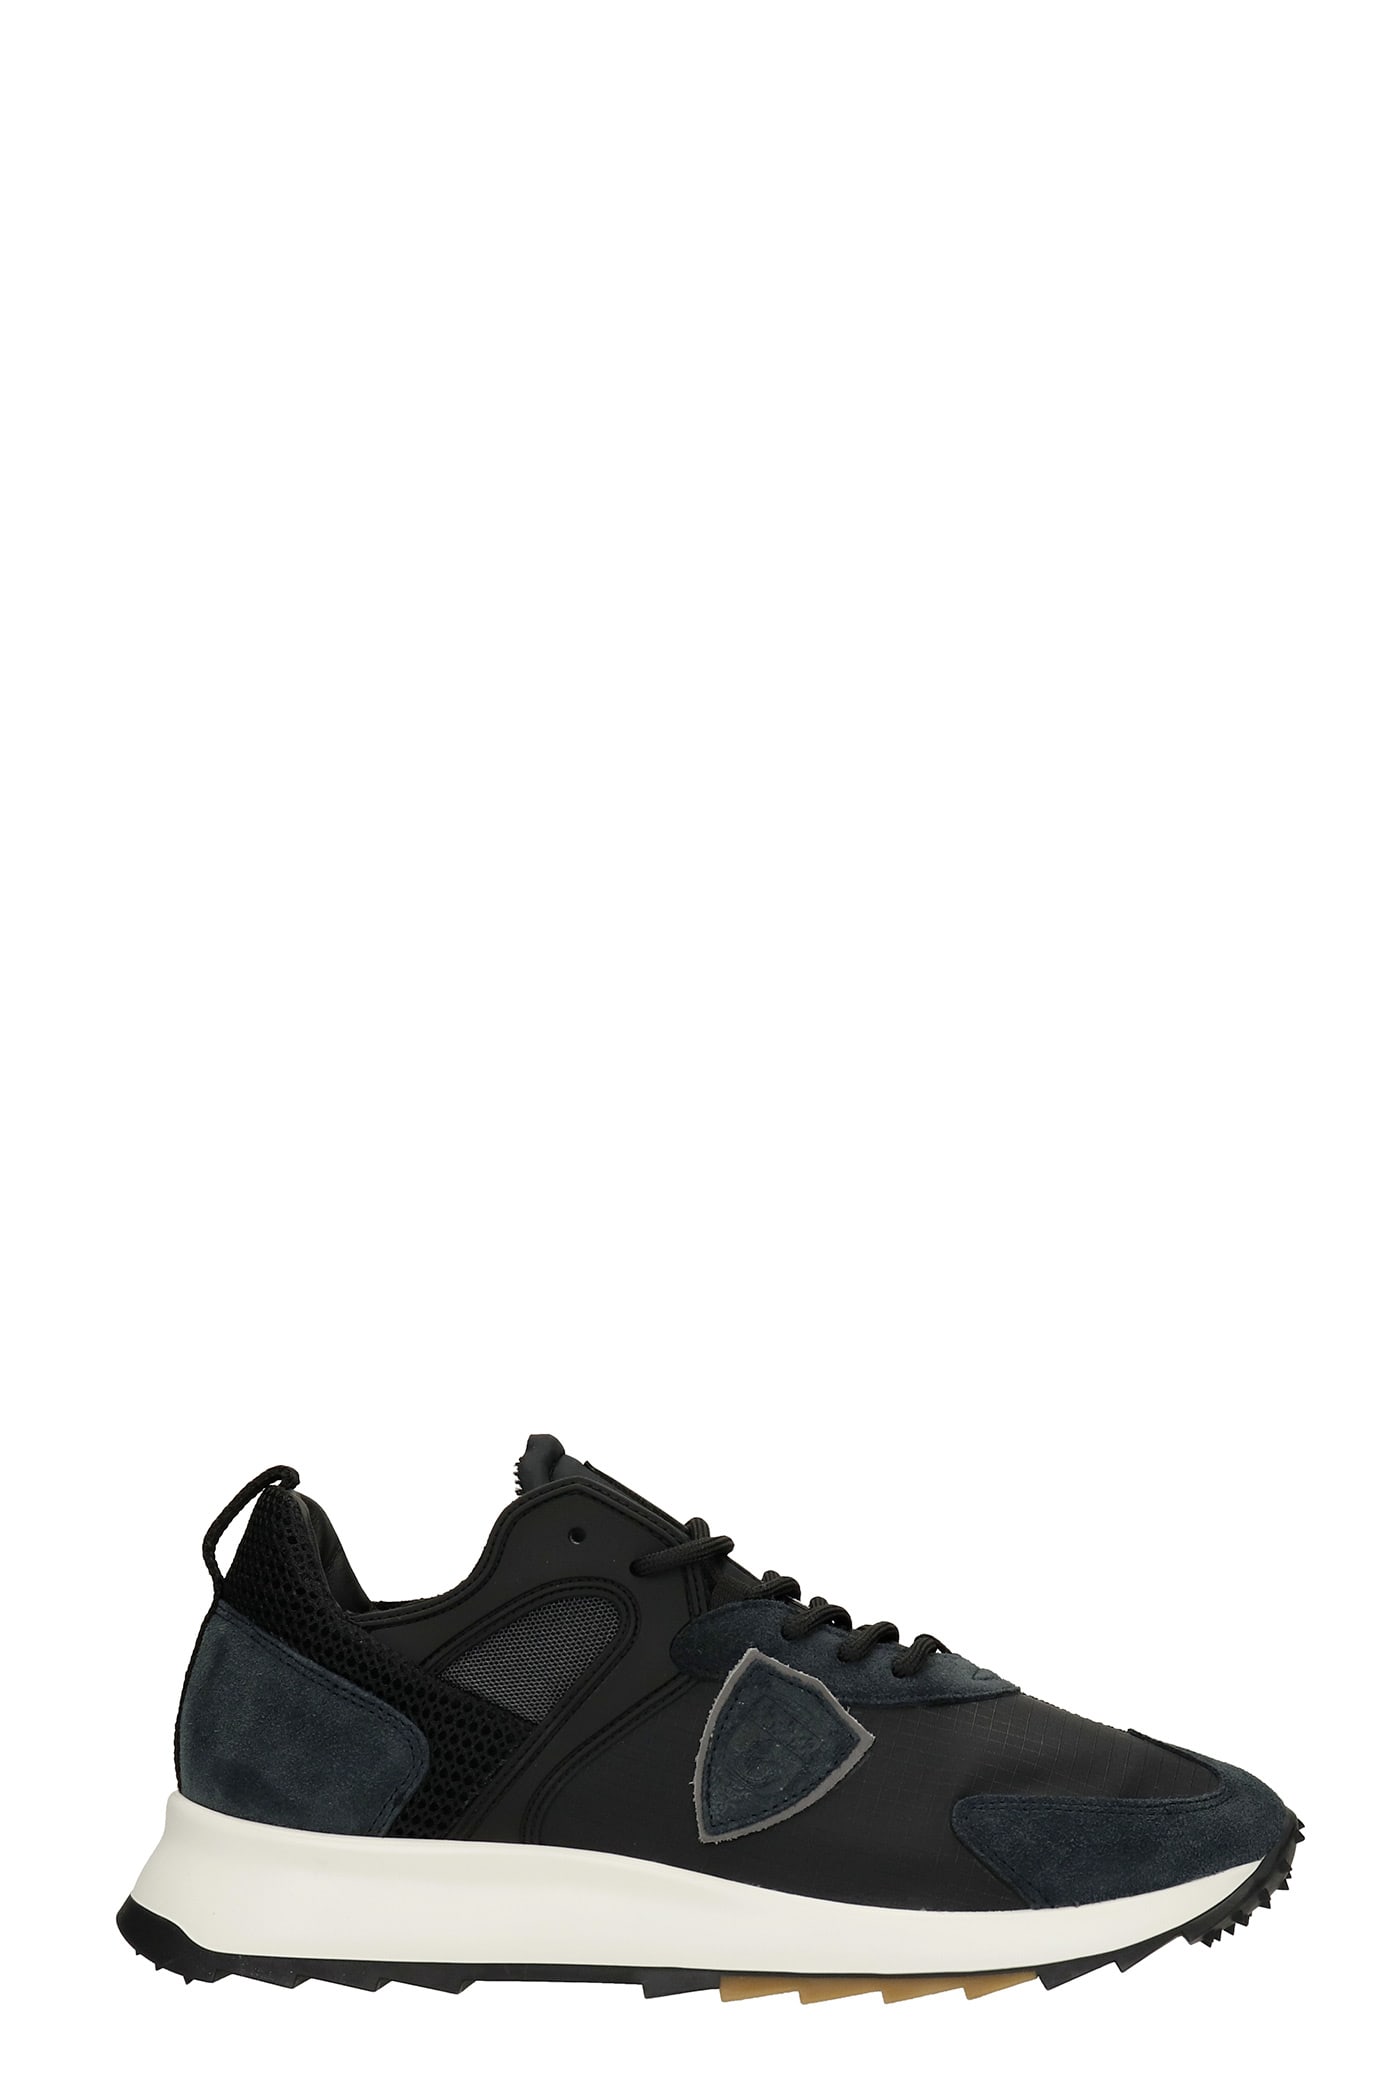 Philippe Model Royale Sneakers In Black Synthetic Fibers